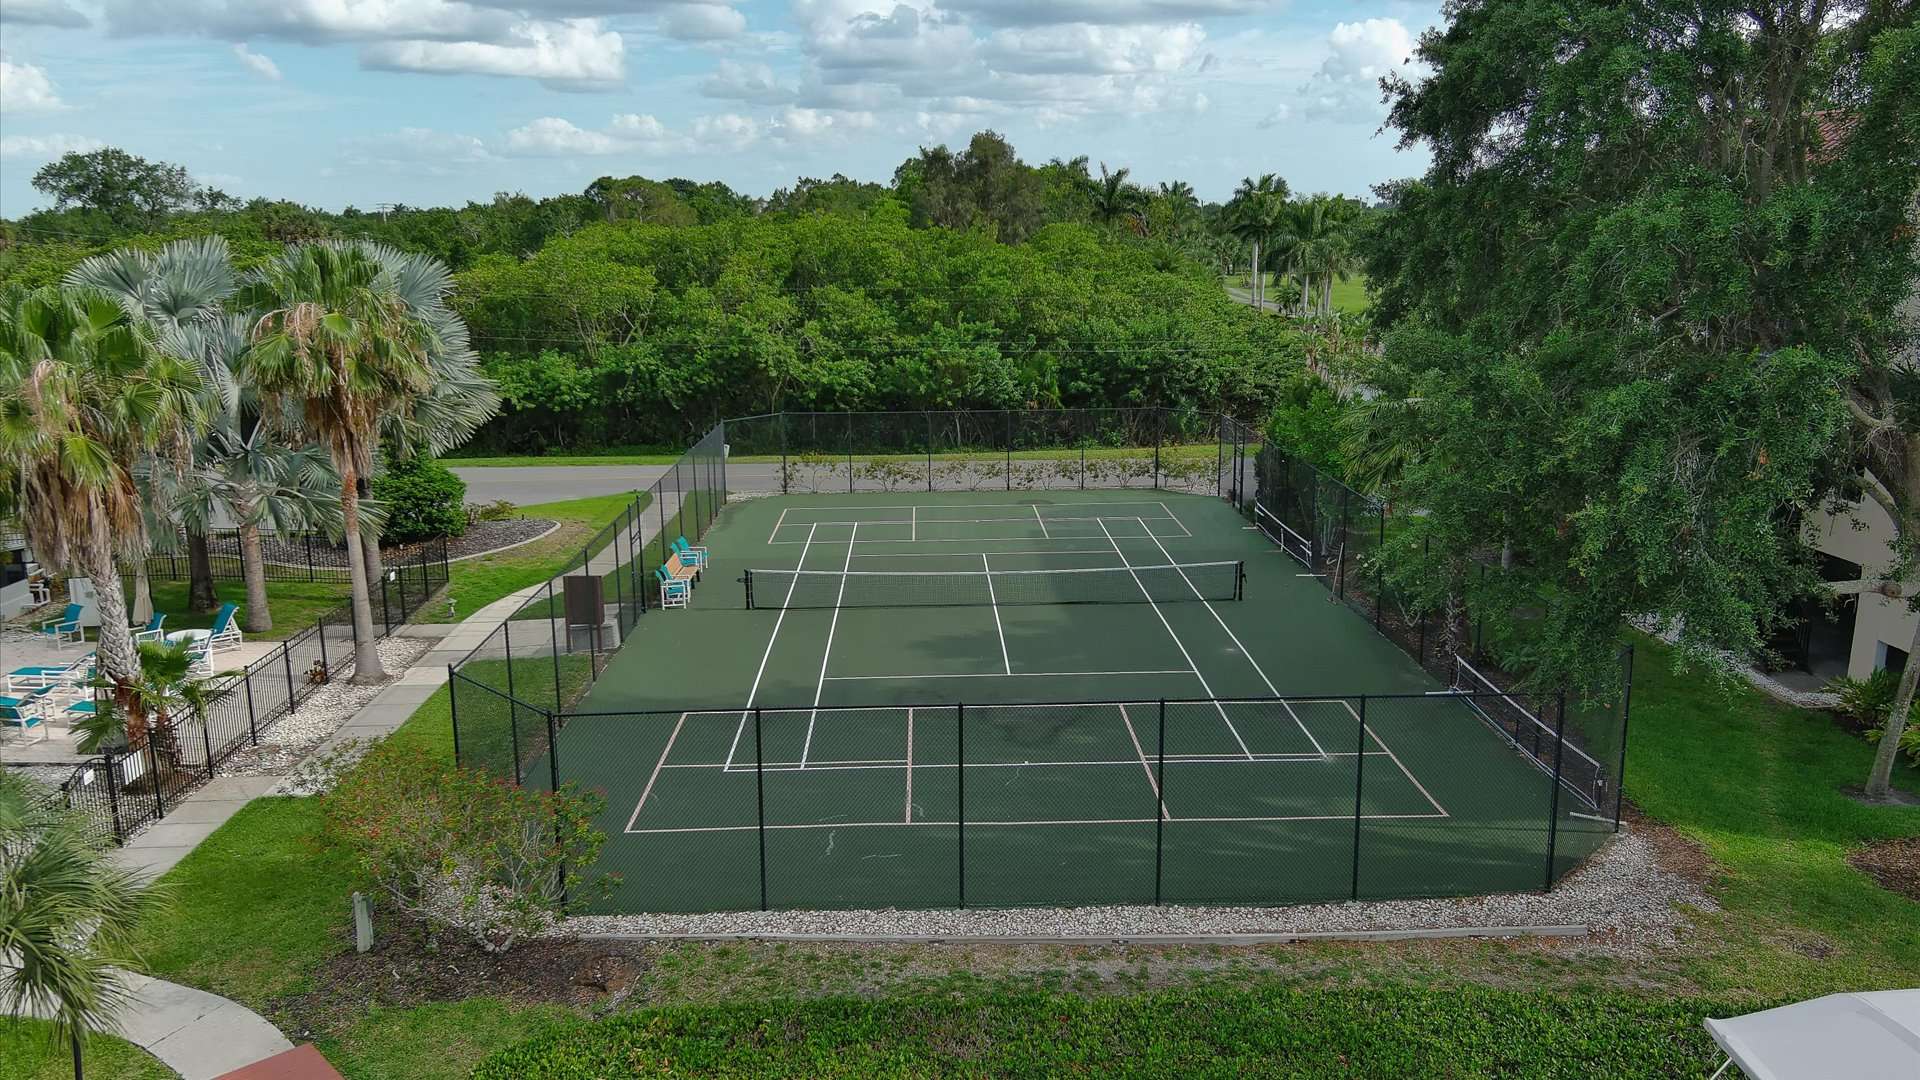 Tennis/Pickleball courts by the community center